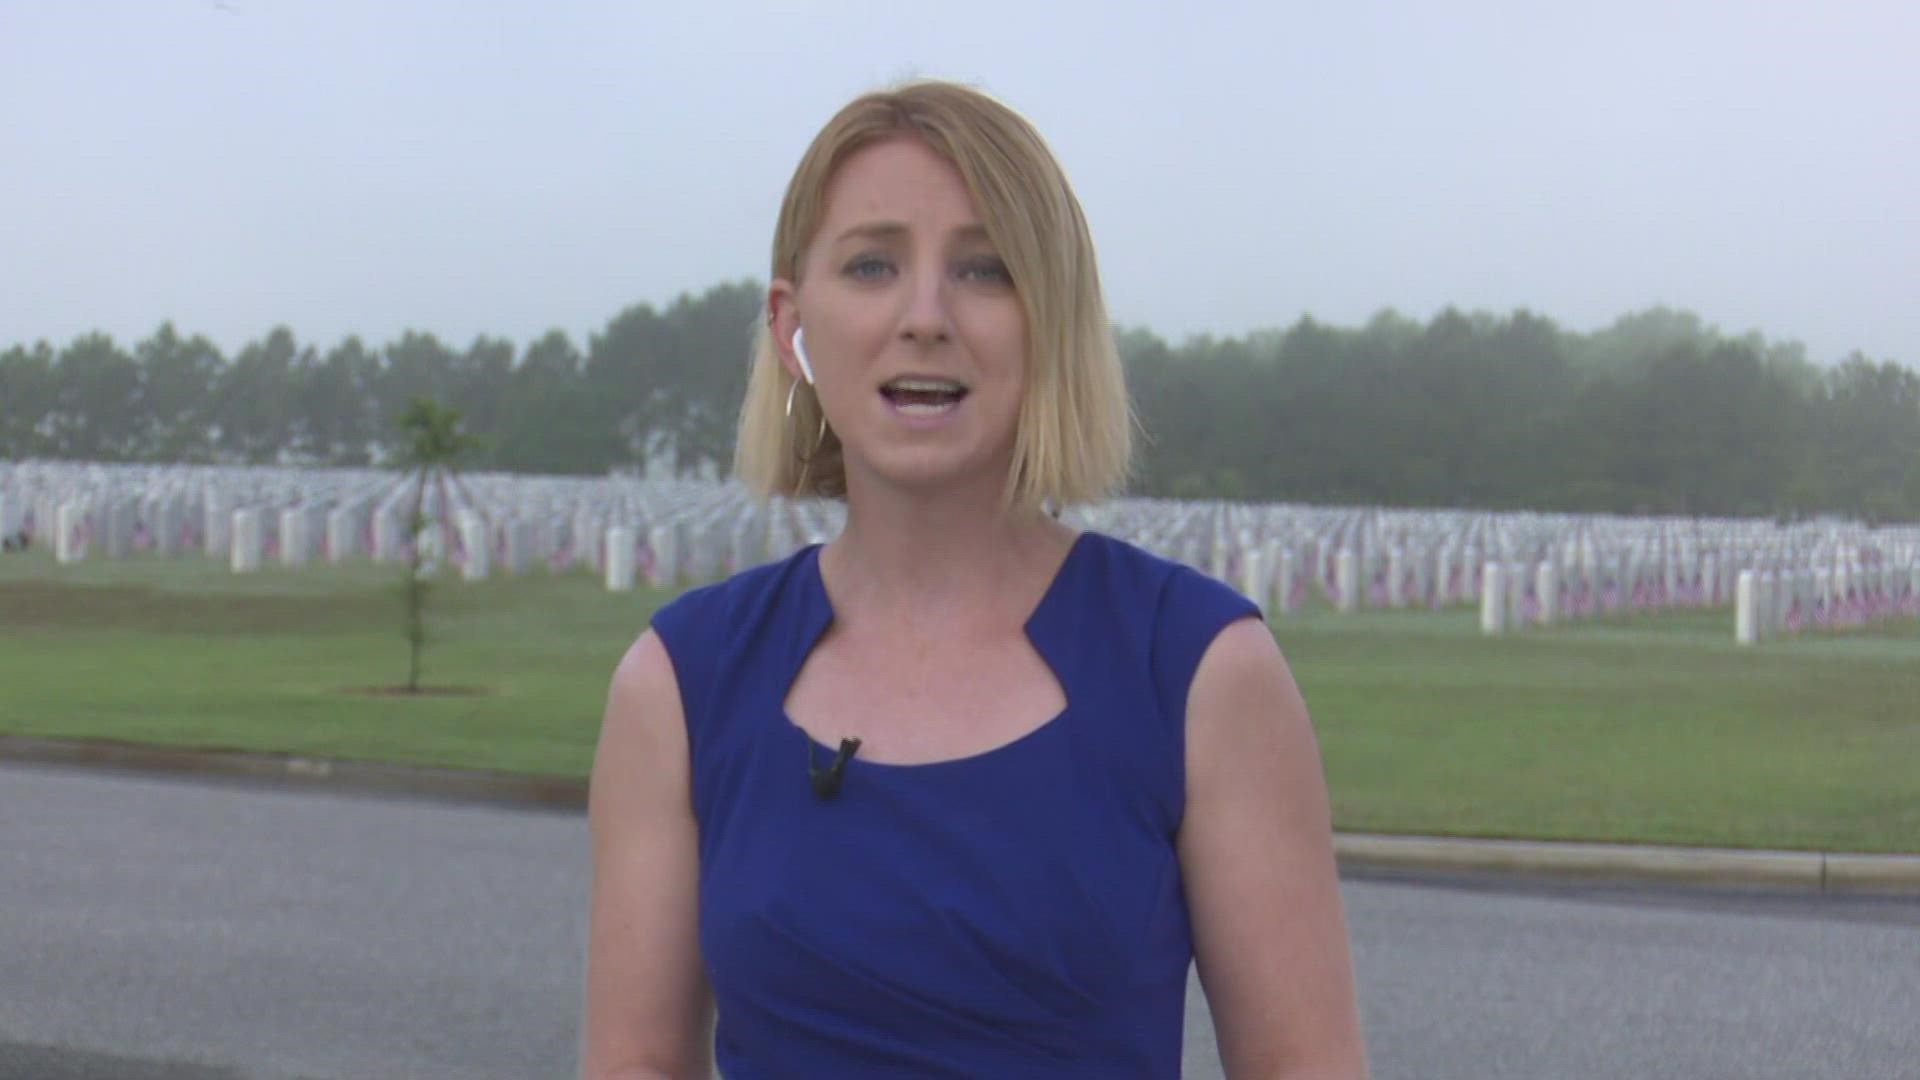 Jacksonville National Cemetery held a Memorial Day observance ceremony Saturday morning. It honored fallen military members and their families.